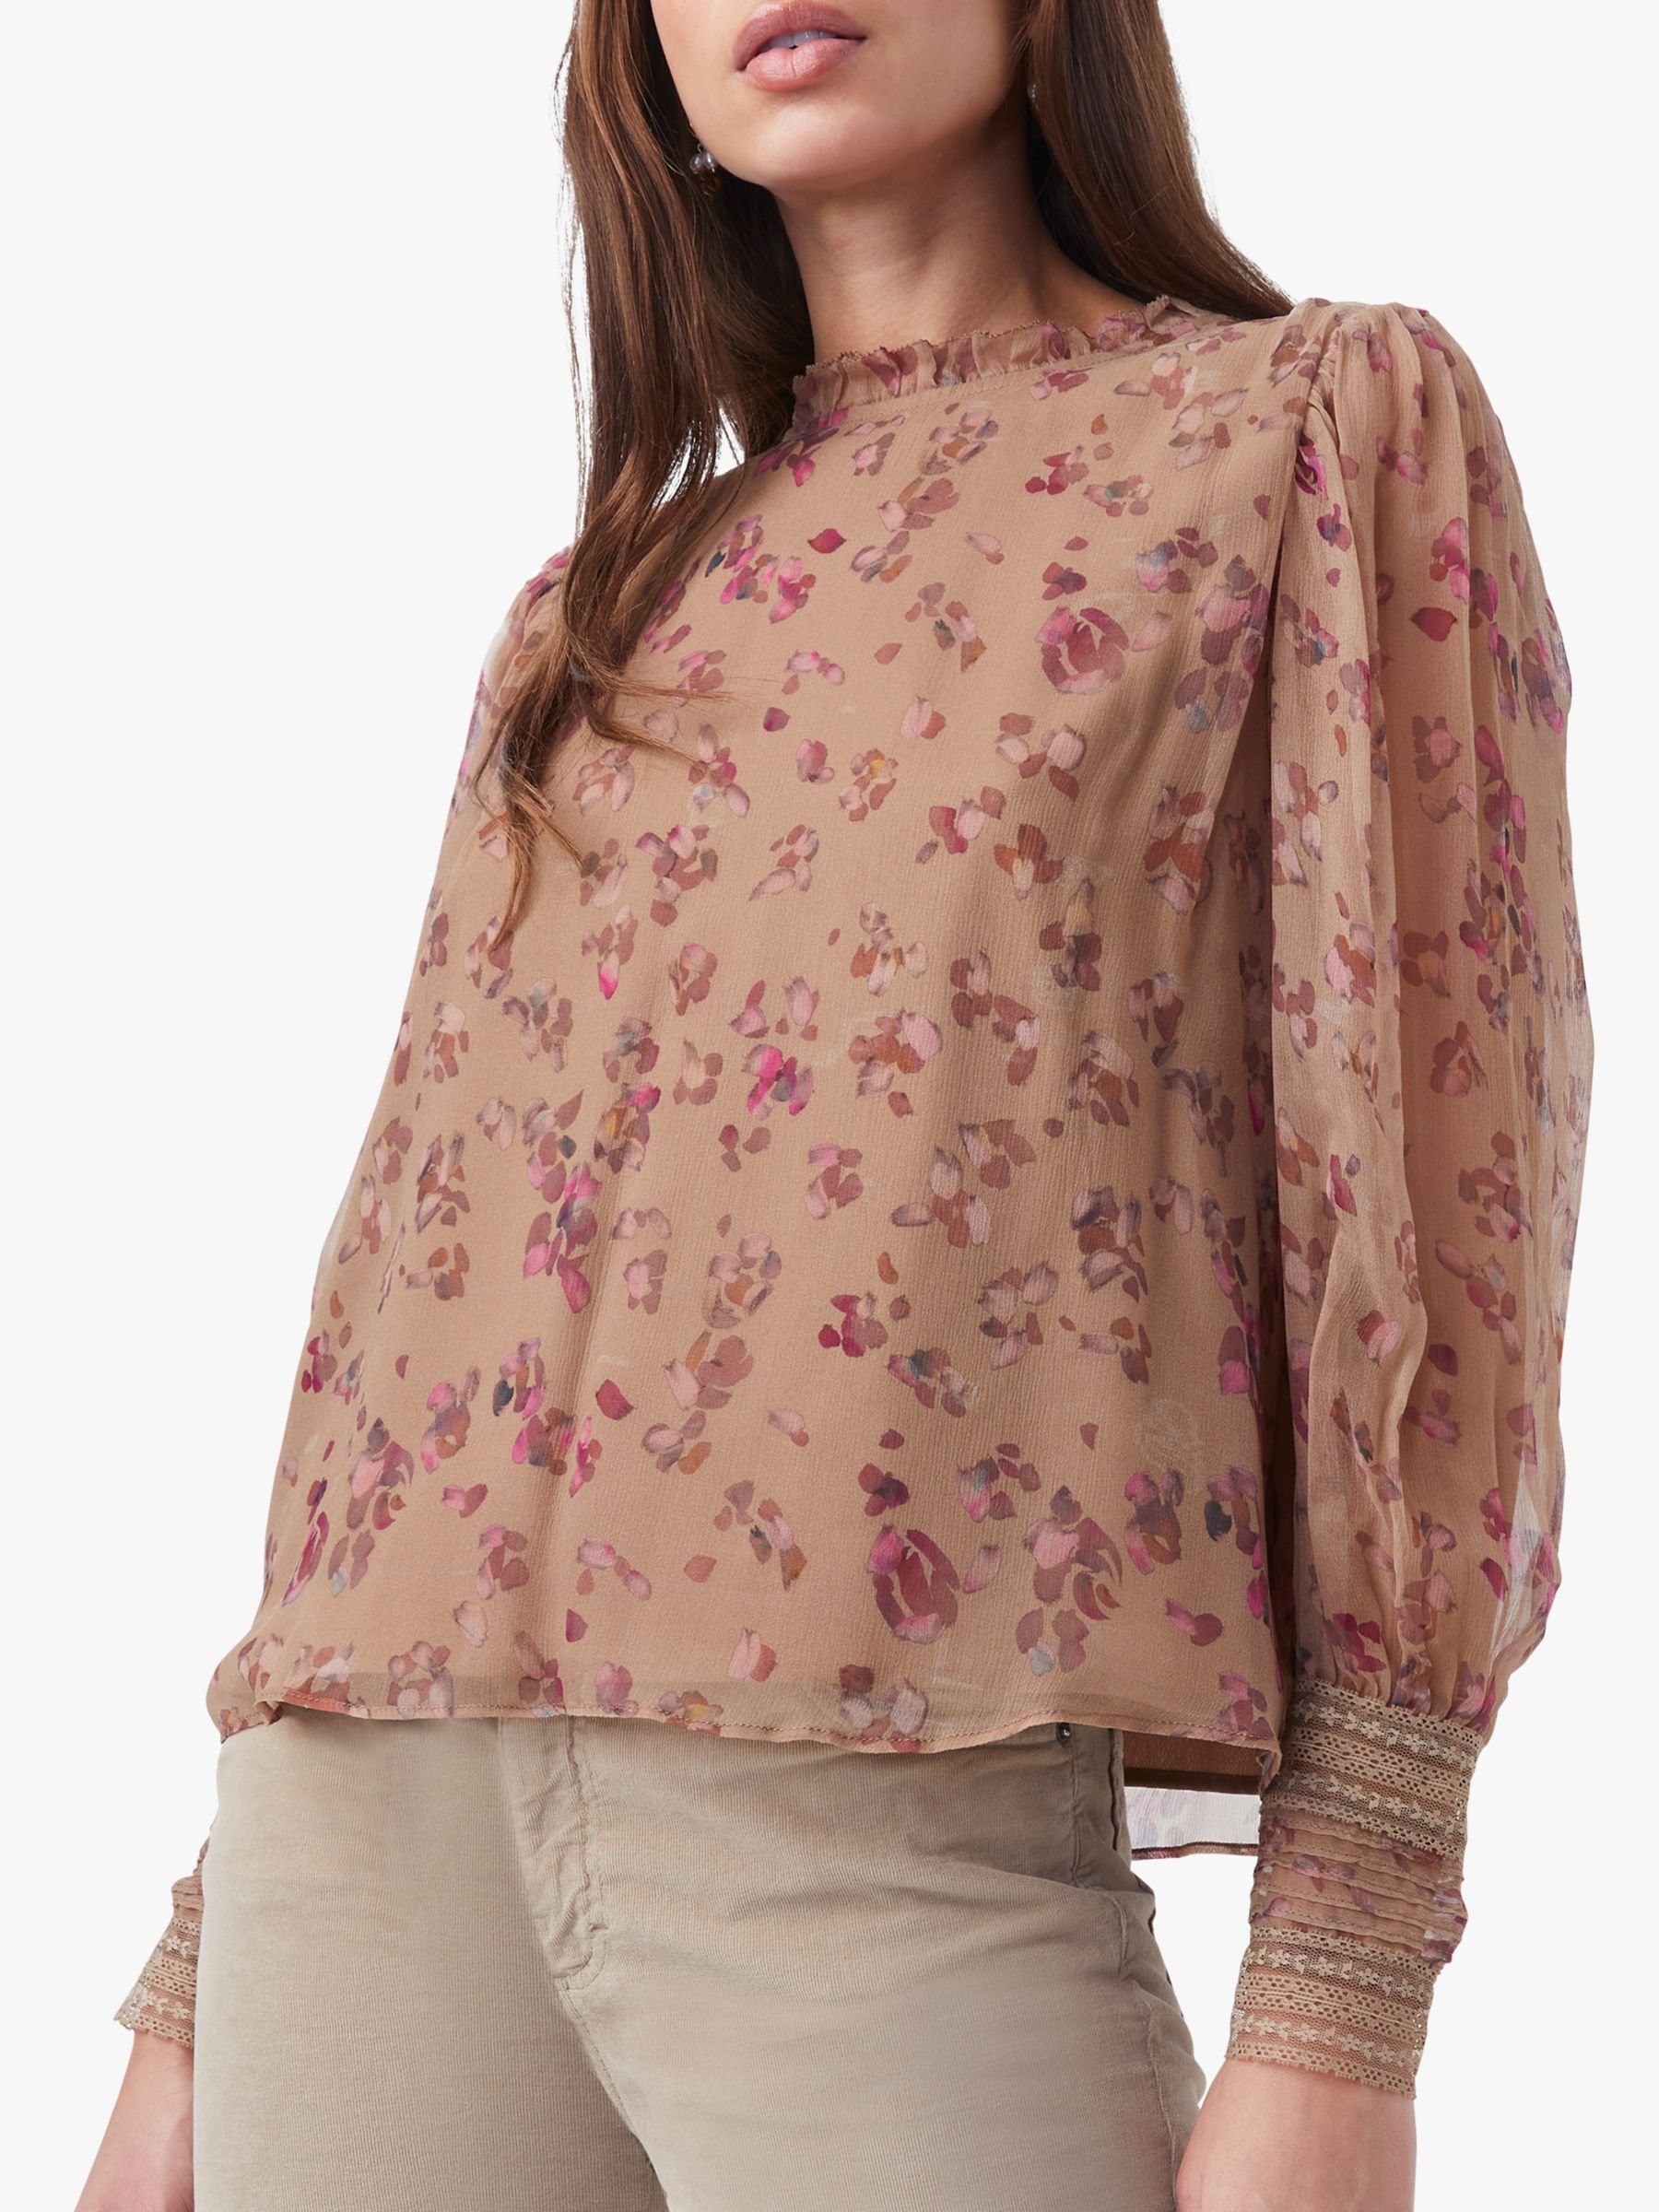 French Connection Fiona Floral Print Blouse, Camel/Multi